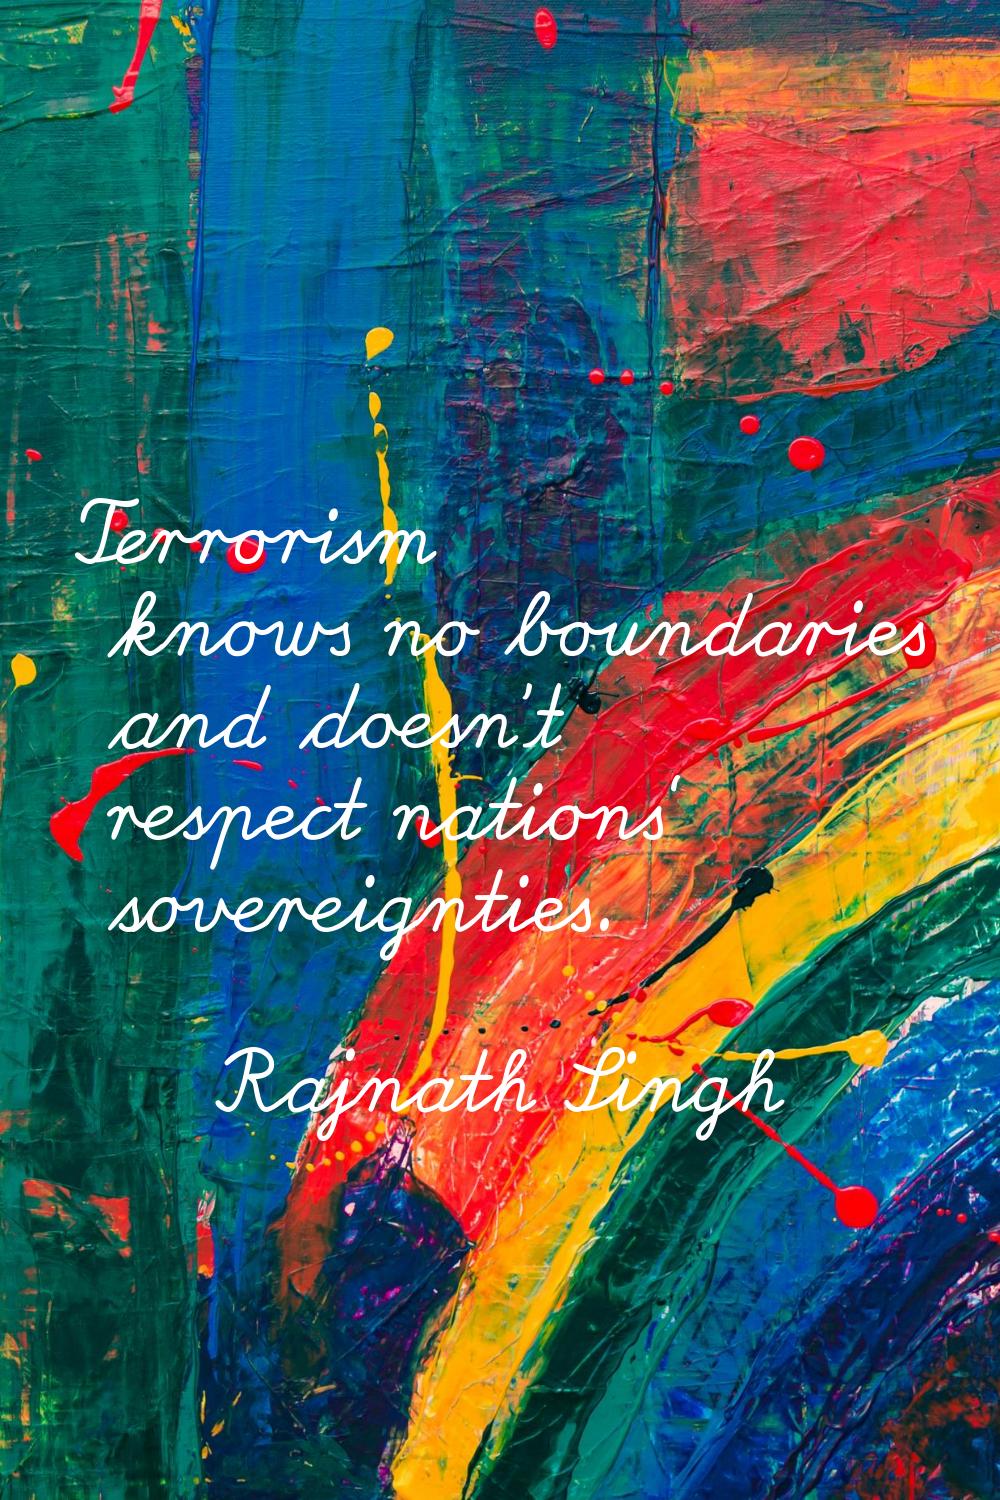 Terrorism knows no boundaries and doesn't respect nations' sovereignties.